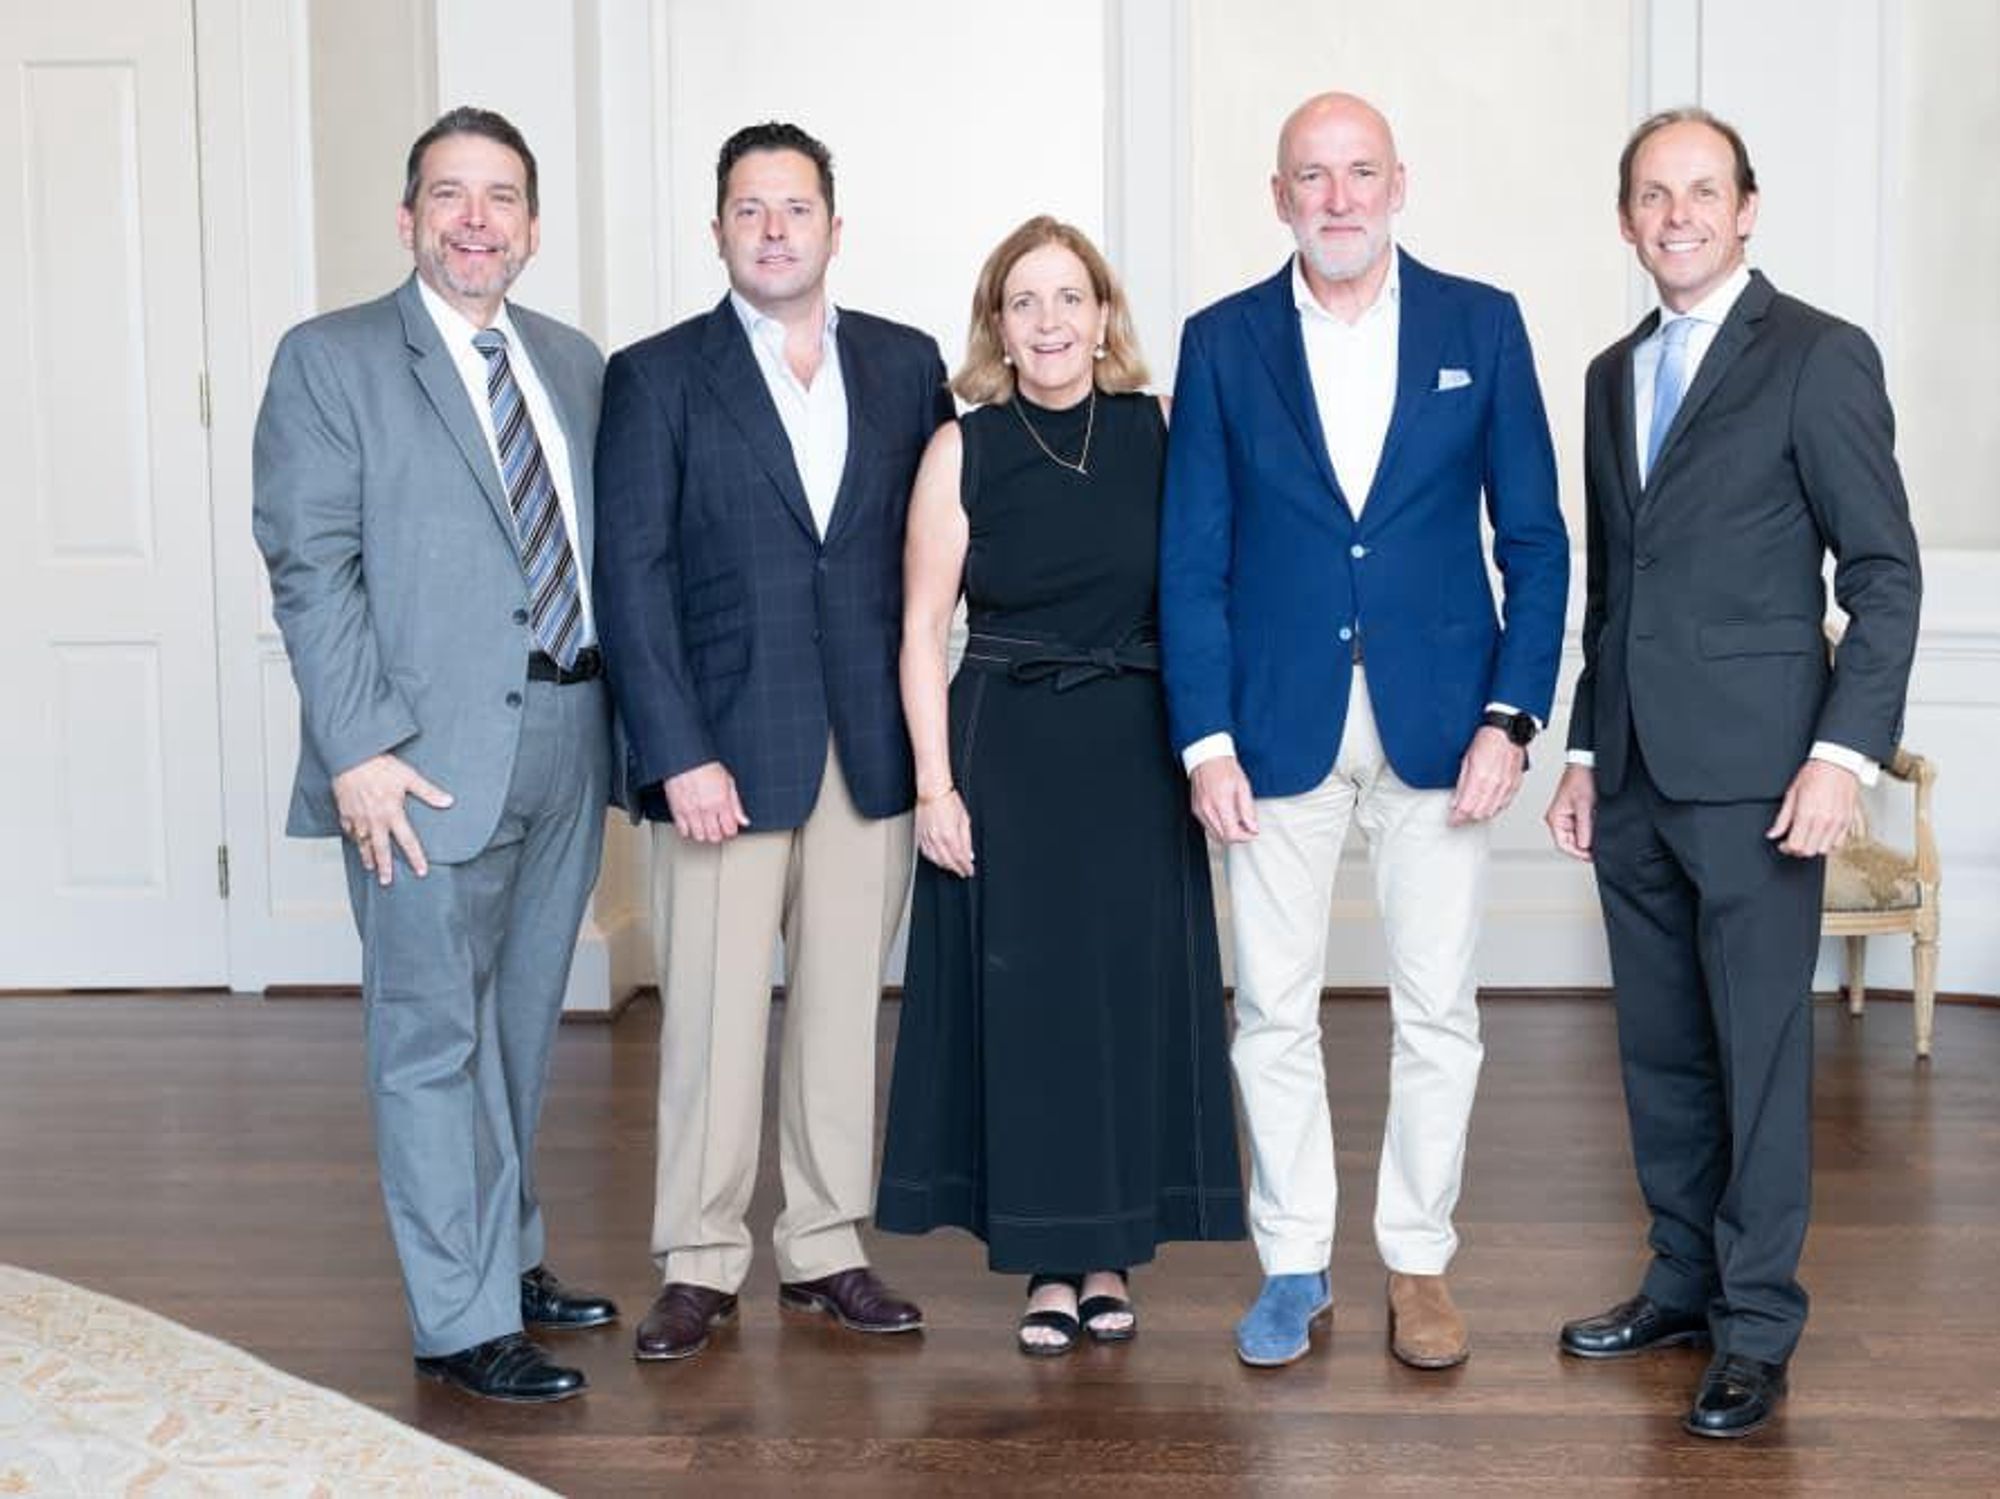 Charles C. Canton, president and CEO of The Center for Pursuit with panel guests: Carlos De Aldecoa Bueno, Isabel and Ignacio Torras, and chef Luis Roger.